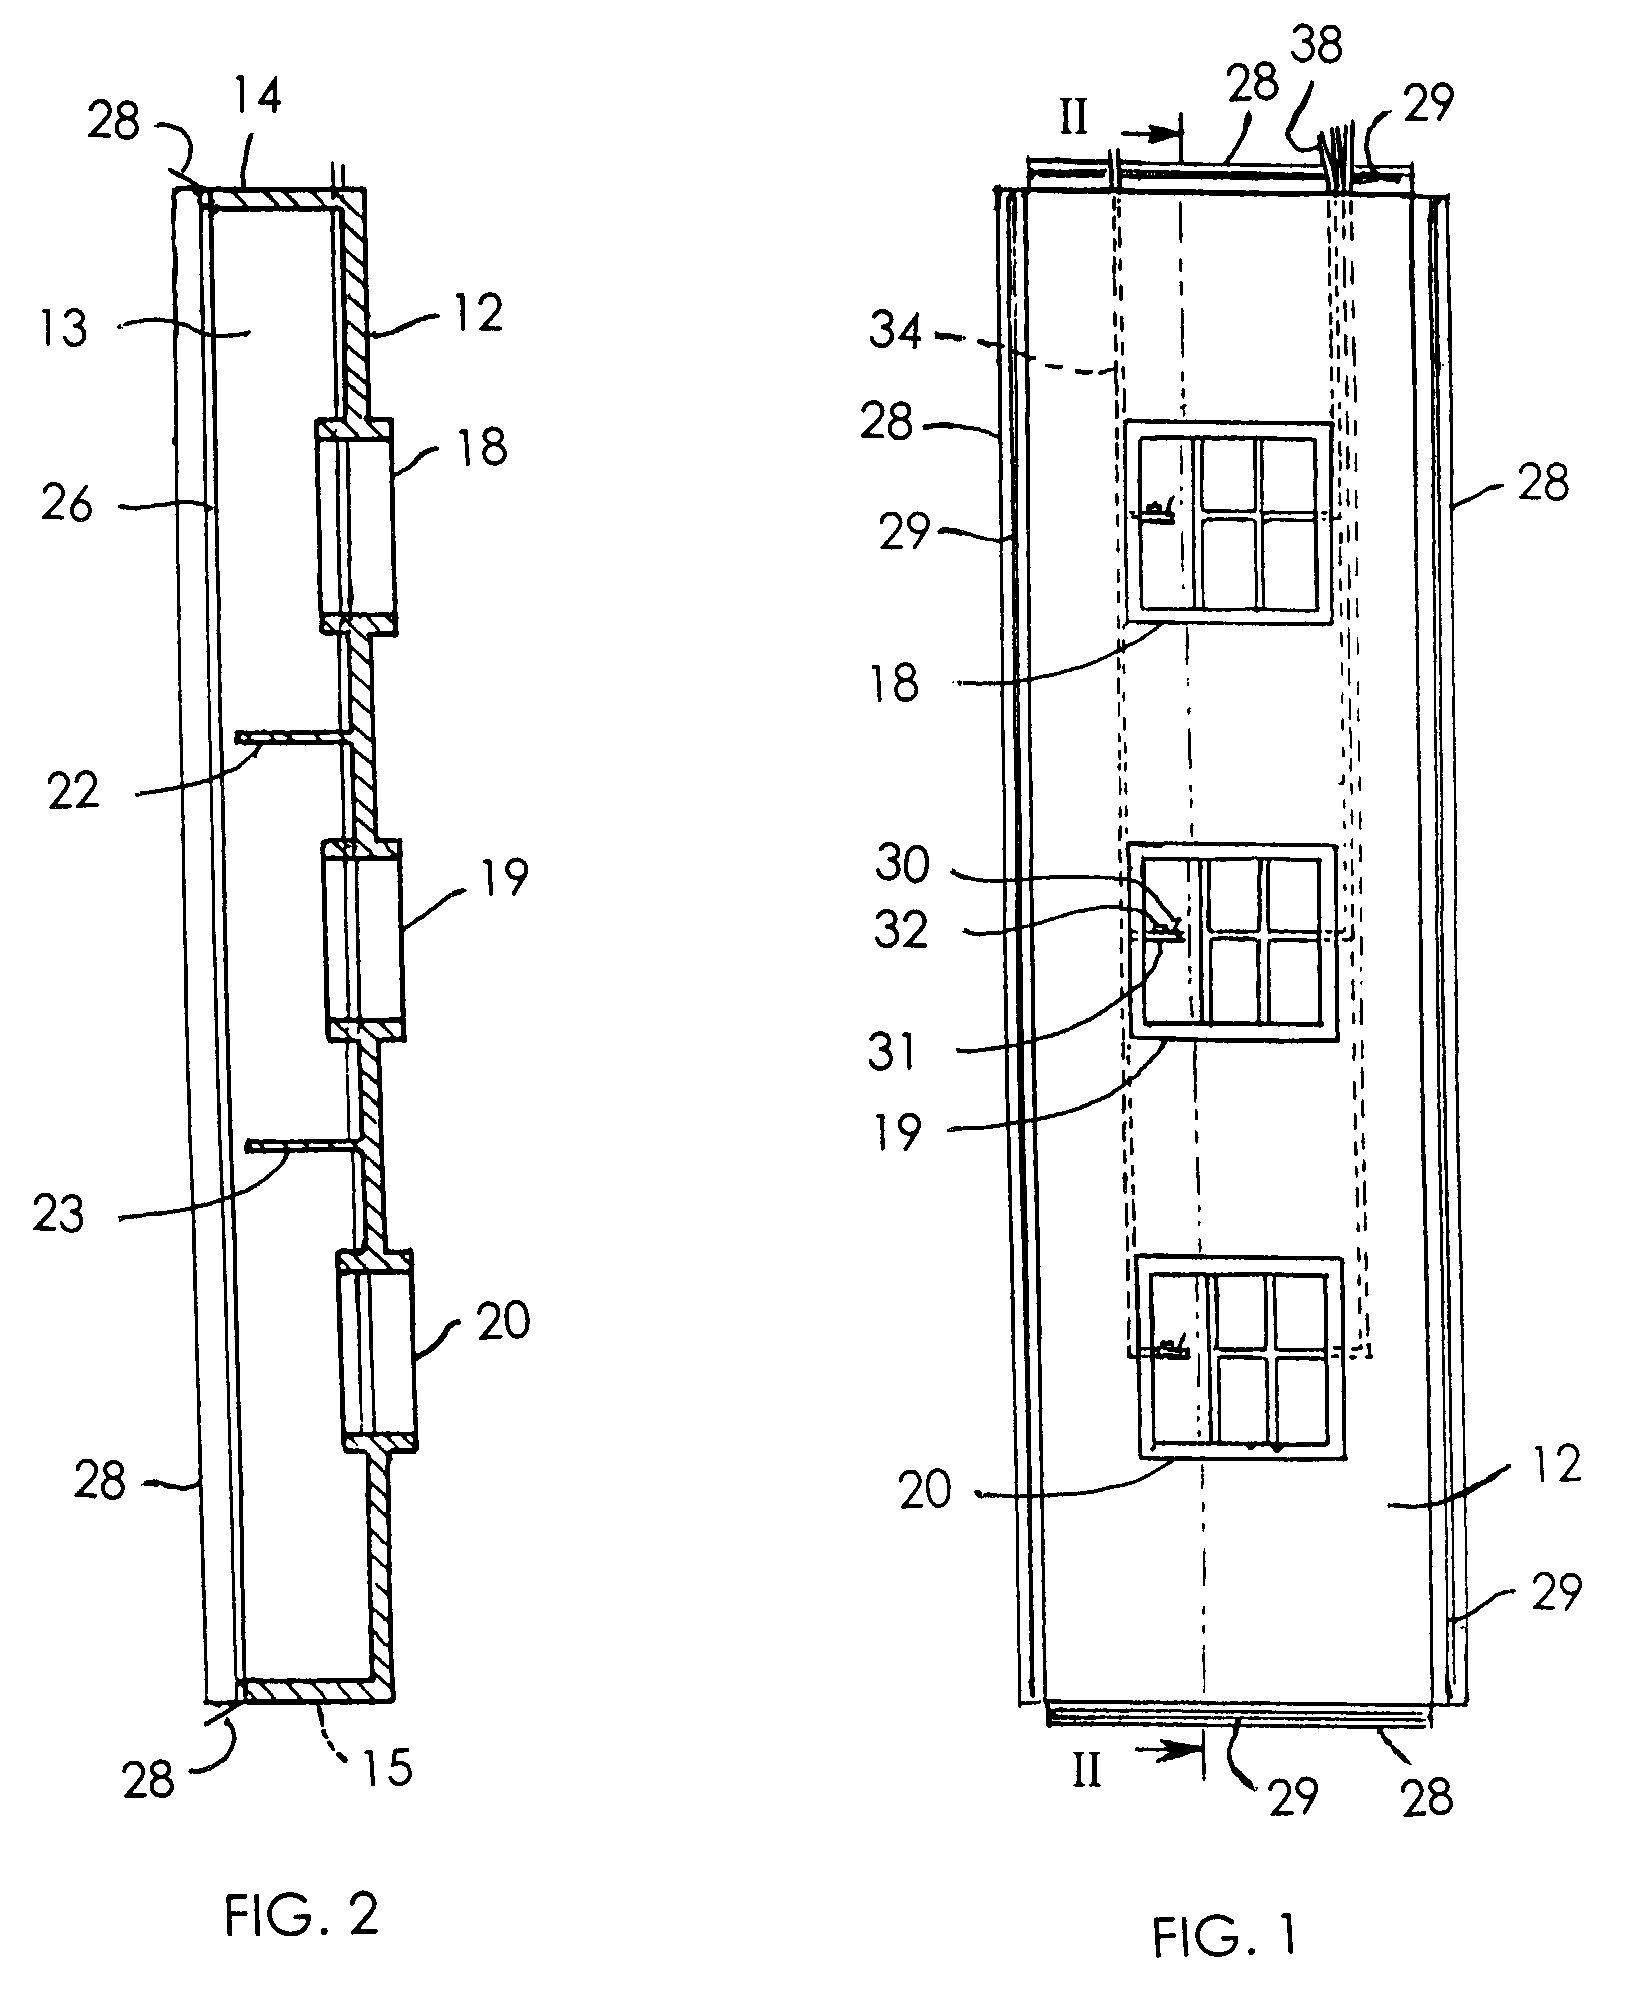 Heat flow measurement tool for a rack mounted assembly of electronic equipment